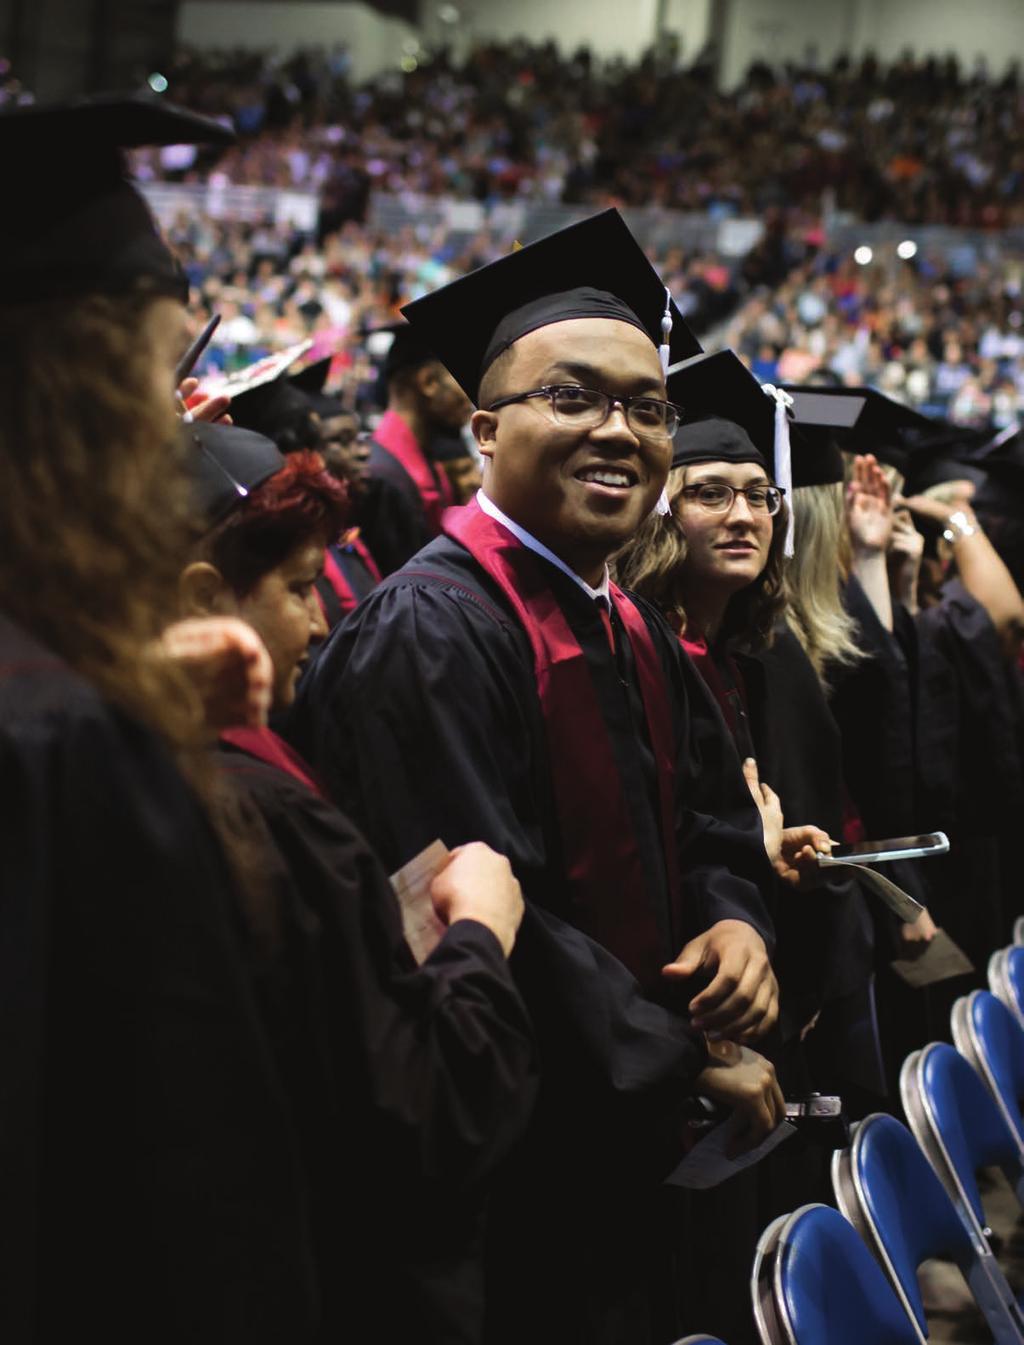 the PROMISE of the DREAM Earn a prestigious IU degree-for about $8,000 a year. Attending college is an investment that can make a tremendous impact on your future.